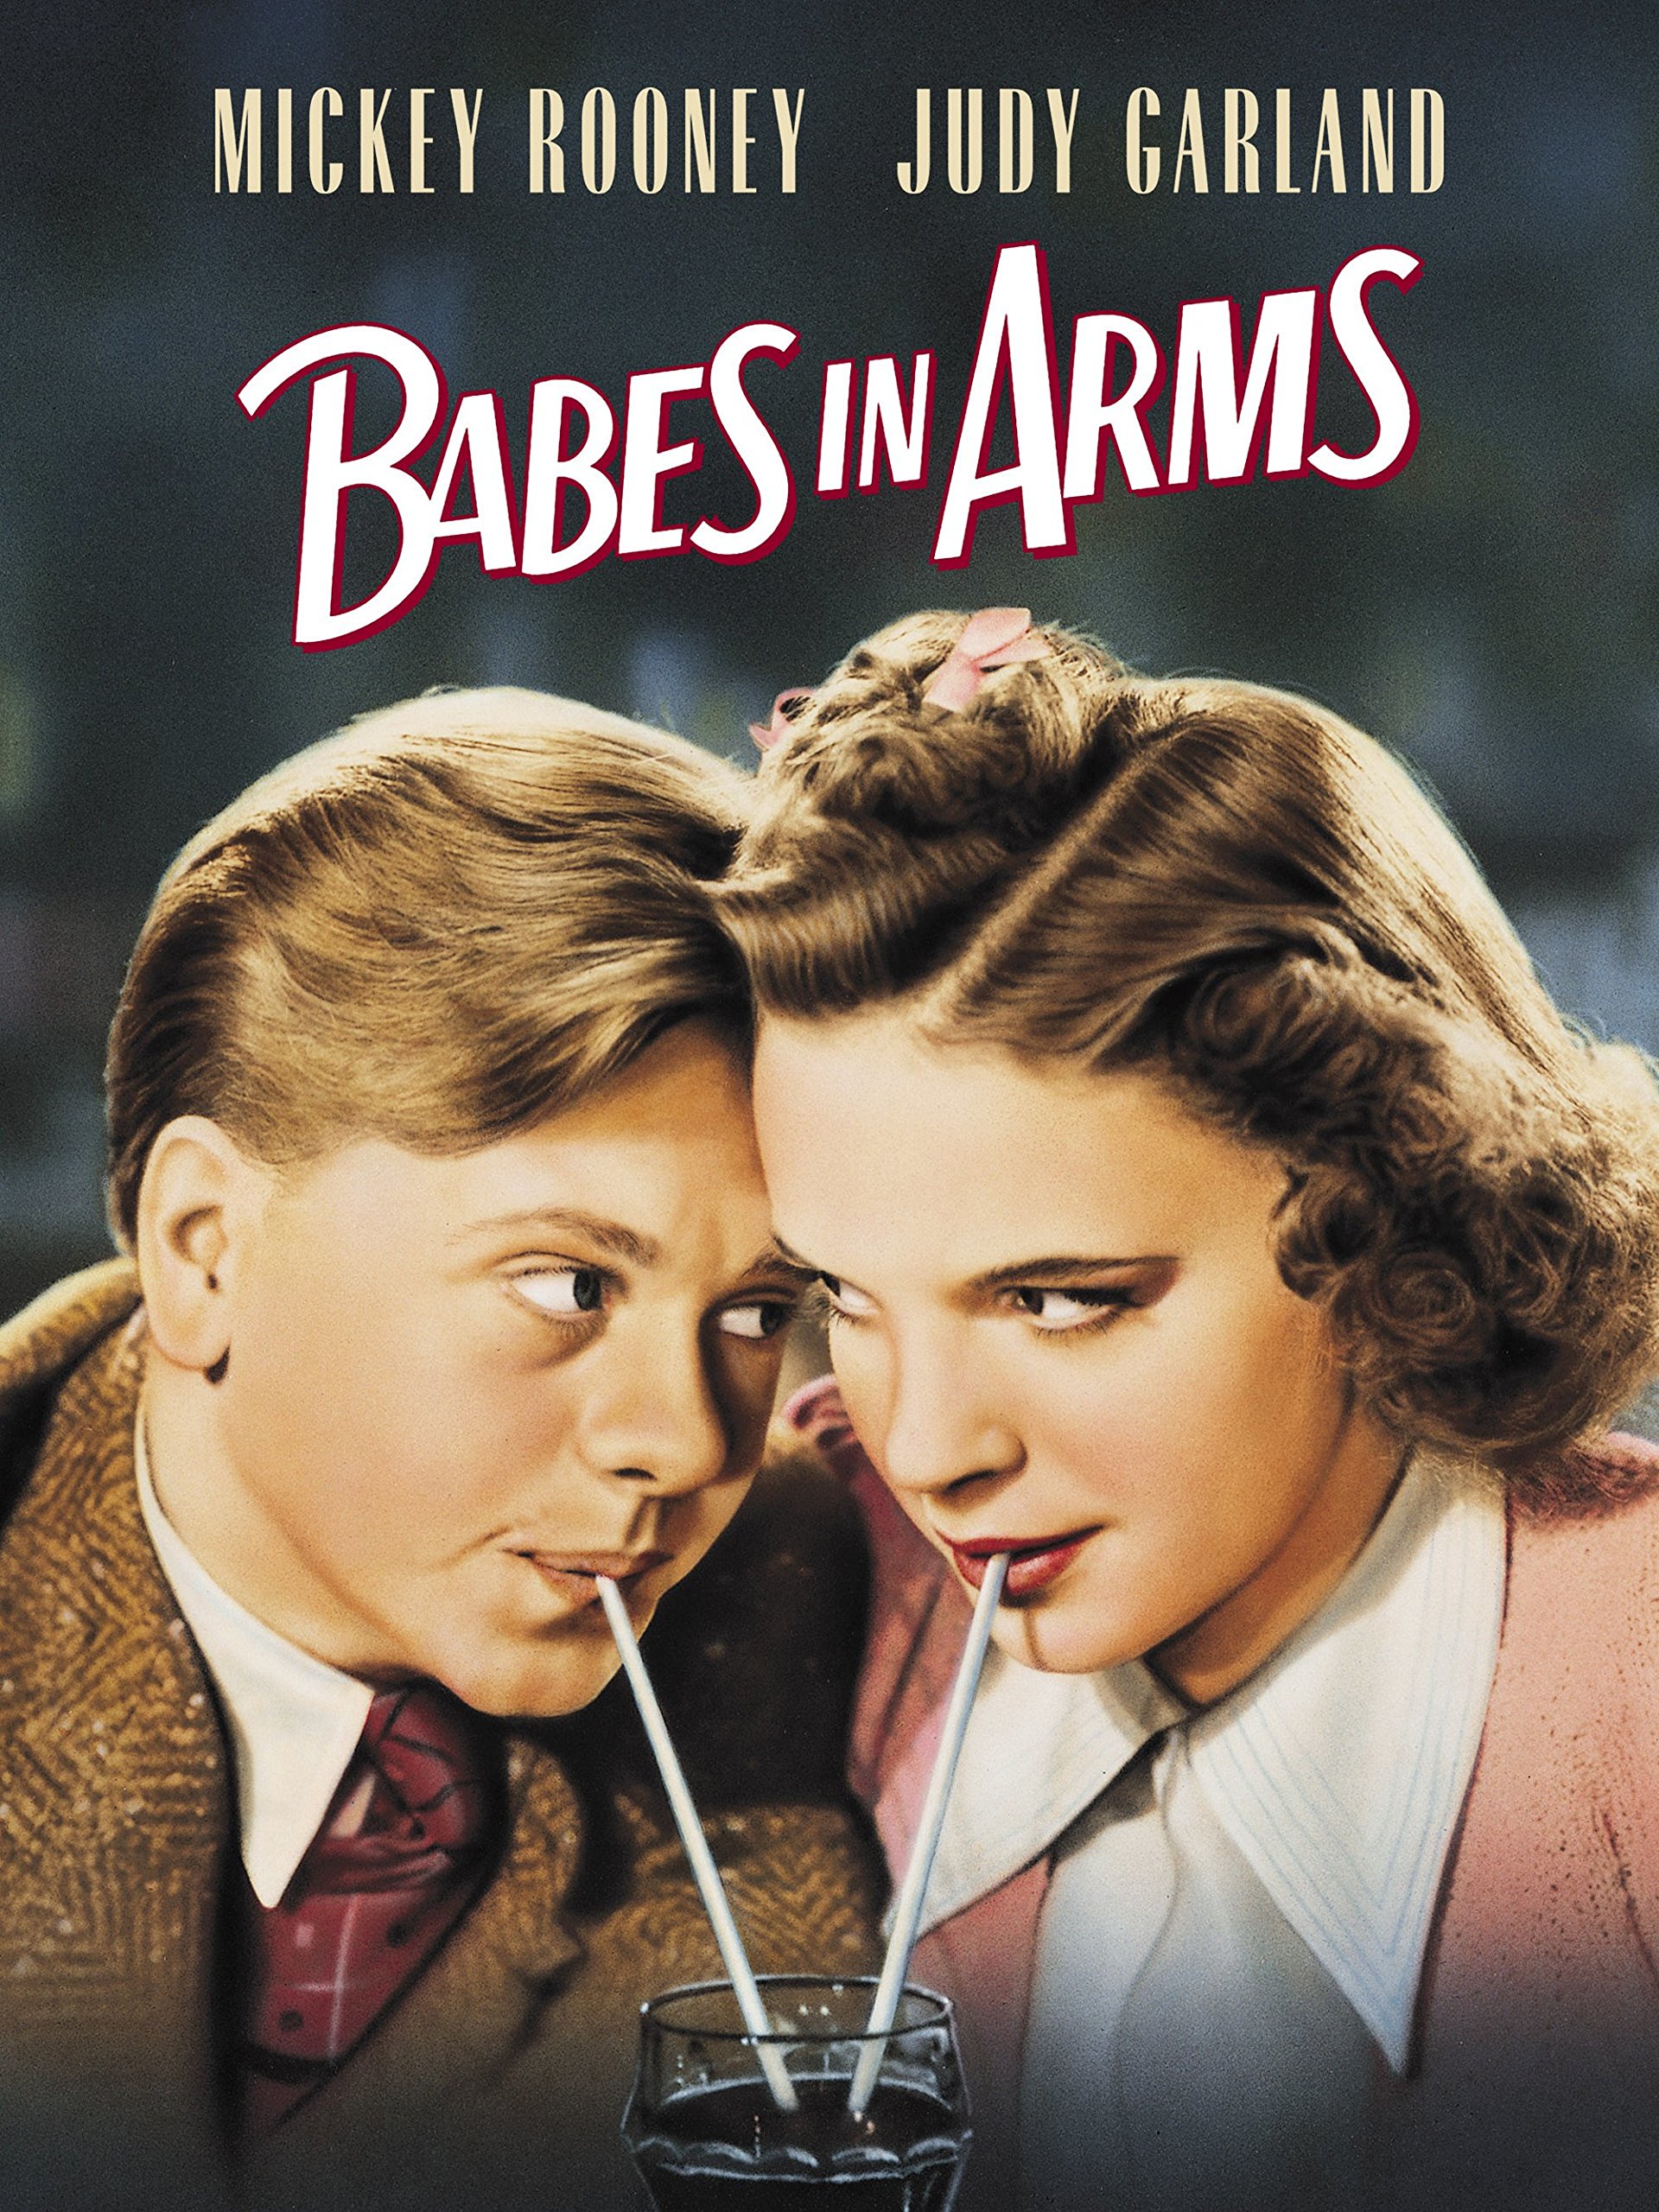 Babes in Arms (1939) starring Mickey Rooney, Judy Garland, directed by Busby Berkeley